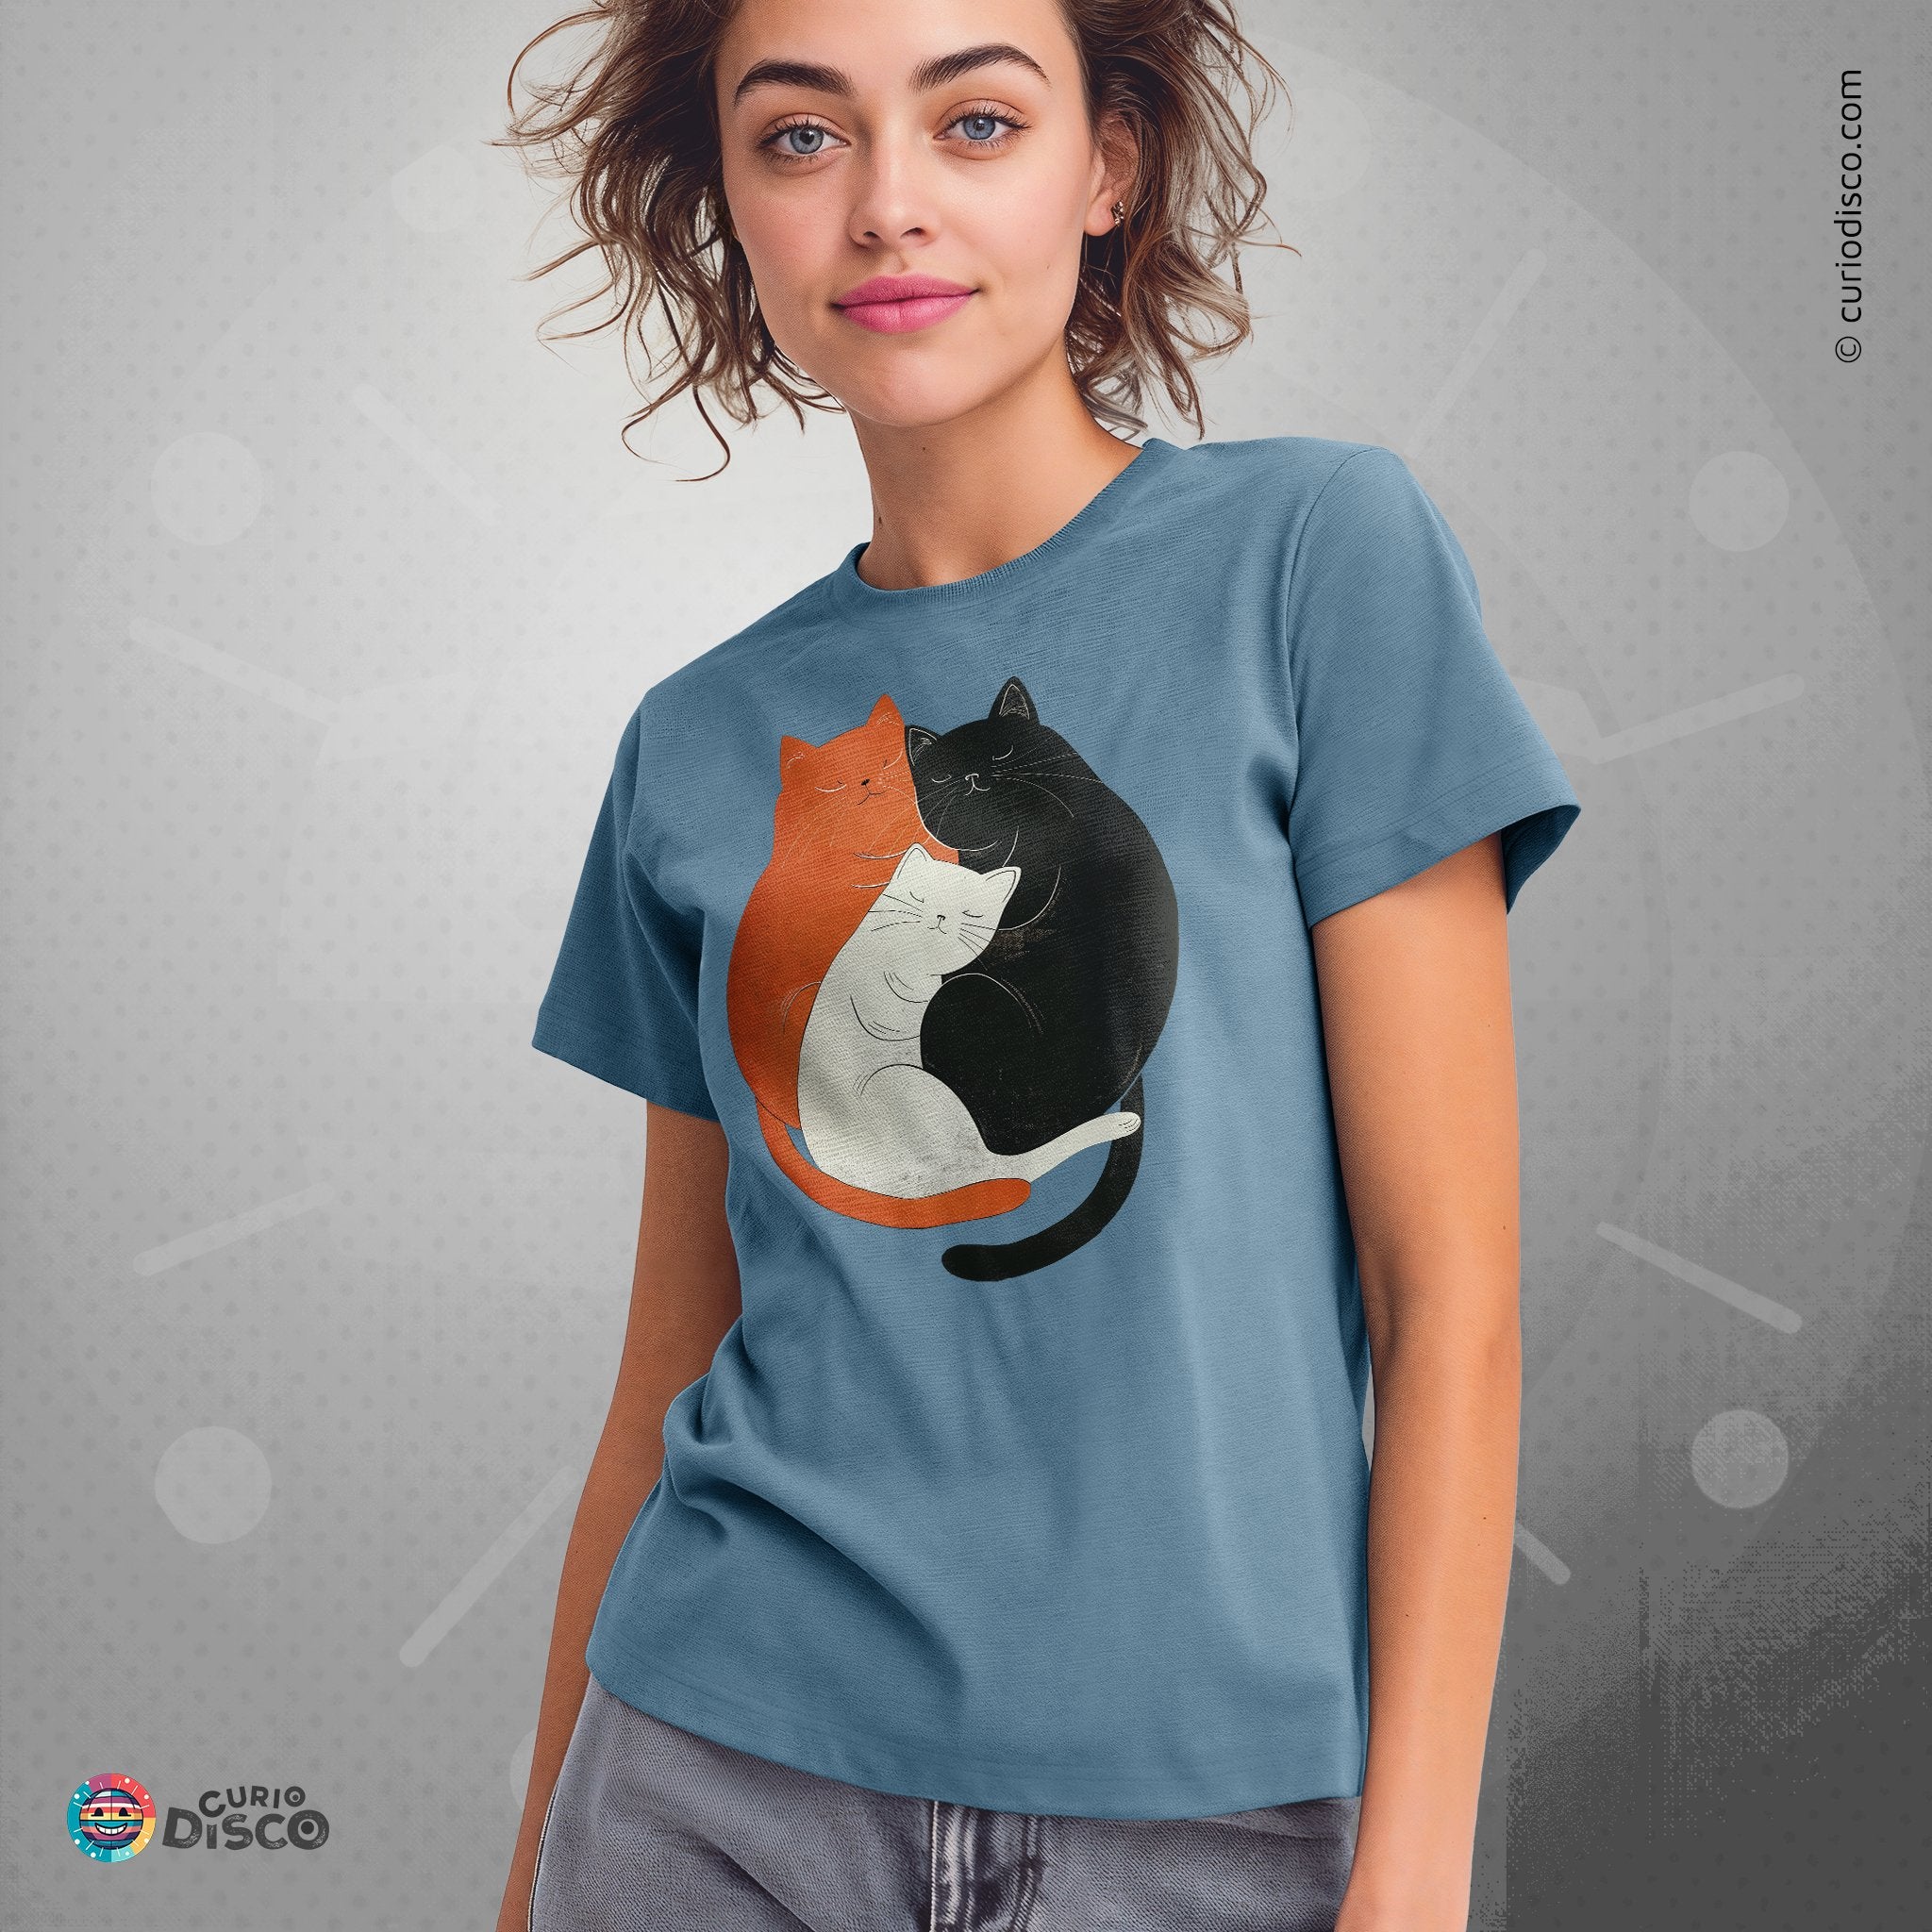 Cat tshirt featuring yin yang calico cat, ideal as cat mom gifts, funny cat shirt, gifts for cat lovers, cat shirts for women. Perfect plus size yoga shirt and gym shirt, trendy yoga gifts, aesthetic clothes, popular right now.